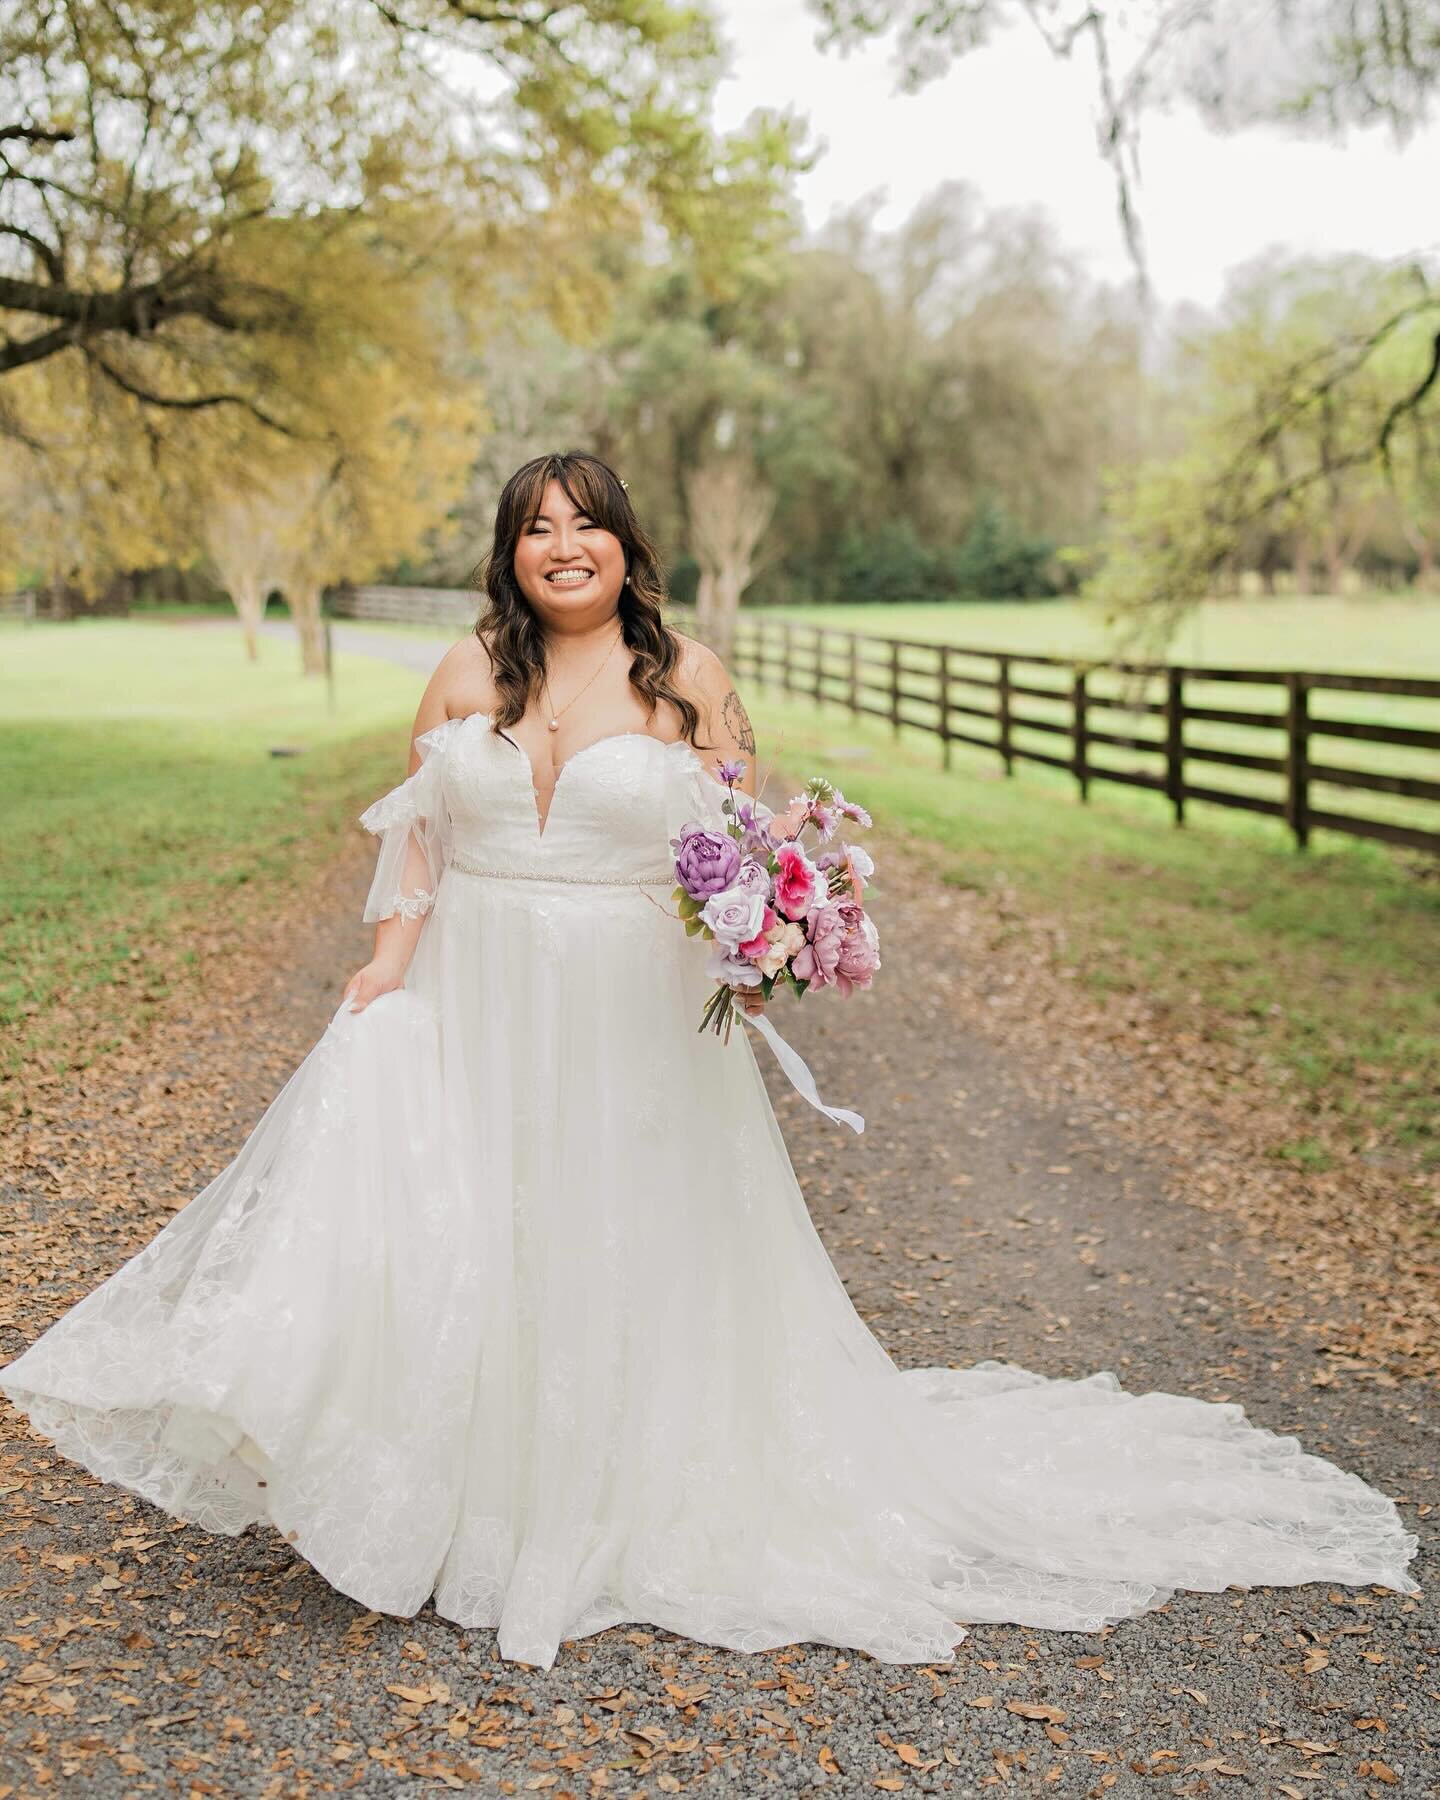 Sunshine just fully living up to her beautiful name&hellip;this girl glows from the inside out and she was an absolute vision on her wedding day☀️ #studiobride 

Beautiful photos by @westhousevisuals 

#weddingglam #bridalglam #weddinghairstyles #bri